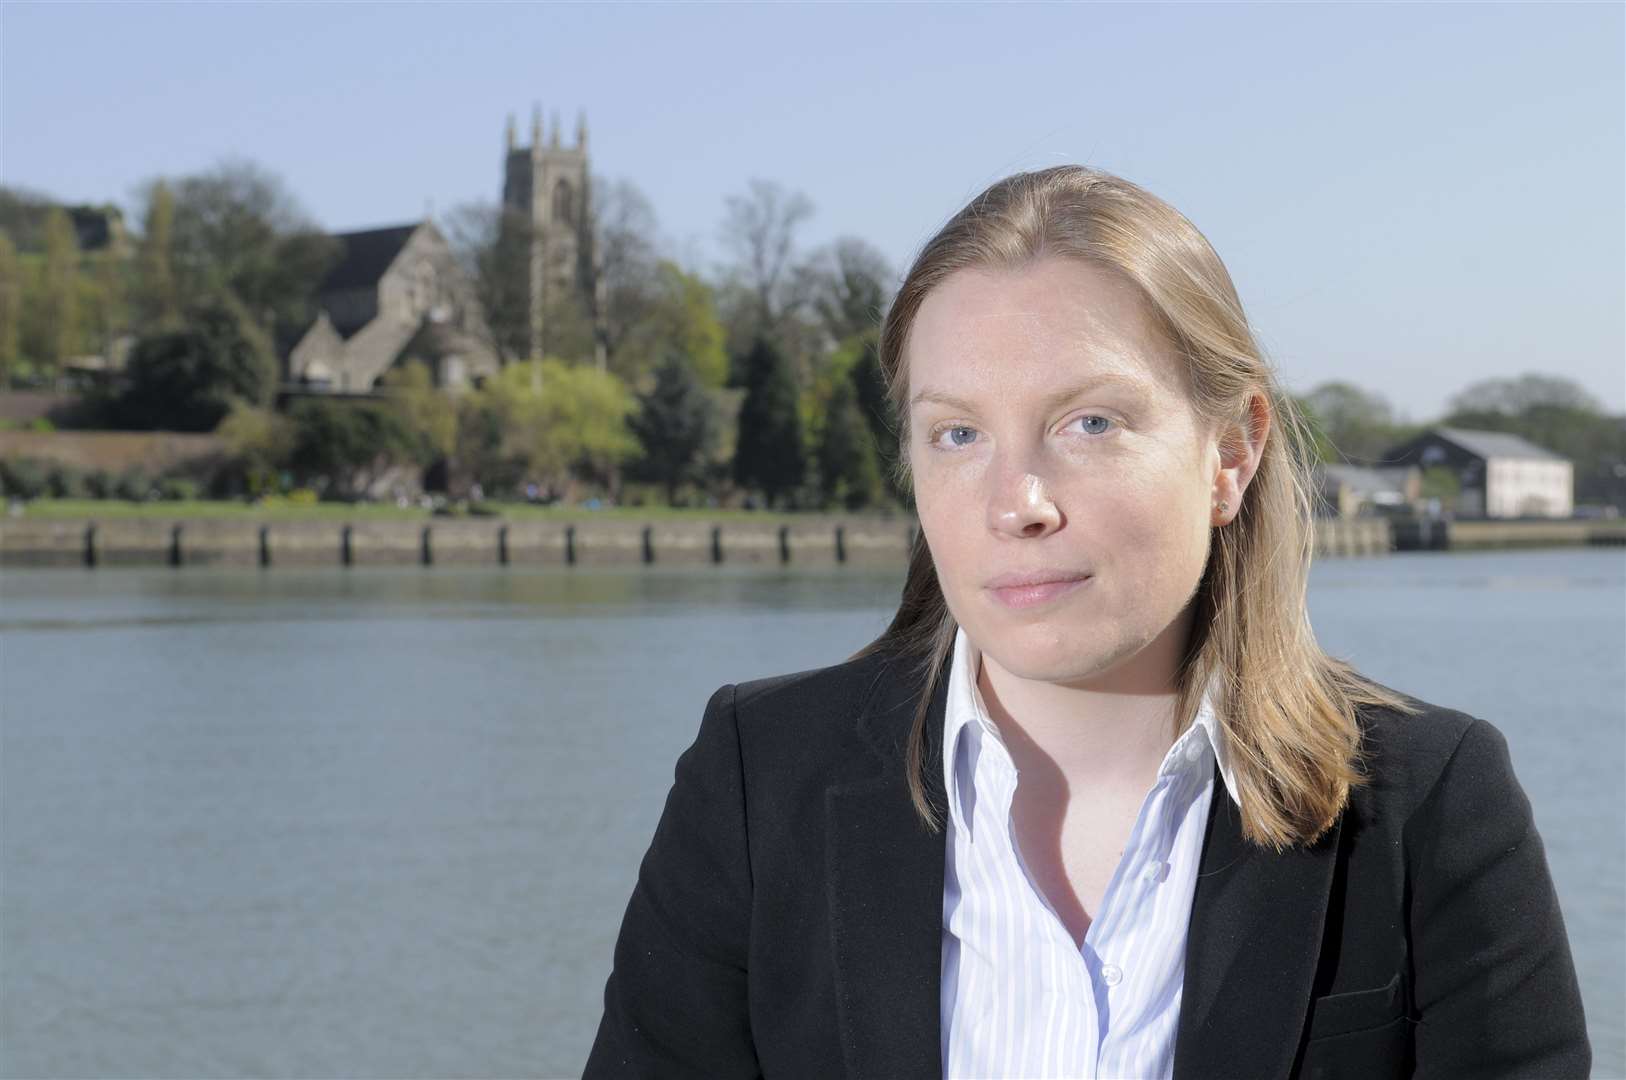 Tracey Crouch, MP for Chatham and Aylesford, also signed the letter to Boris Johnson and Rishi Sunak